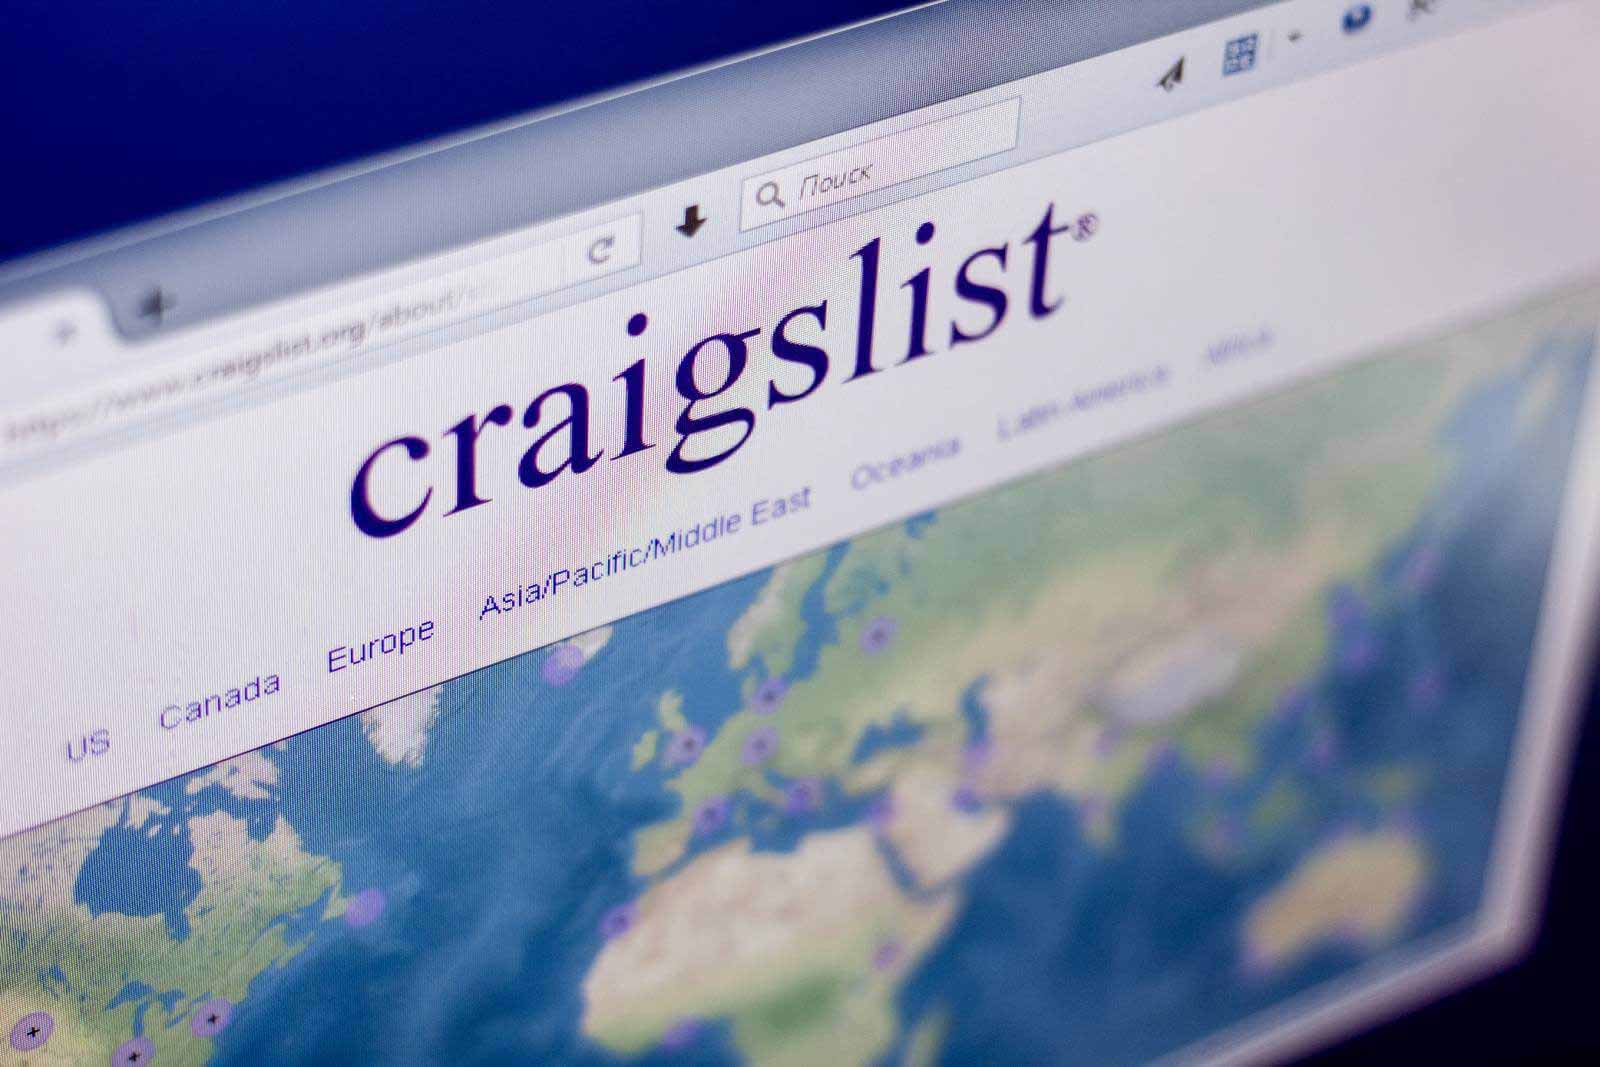 How to Spot a Craigslist Scam in 2020